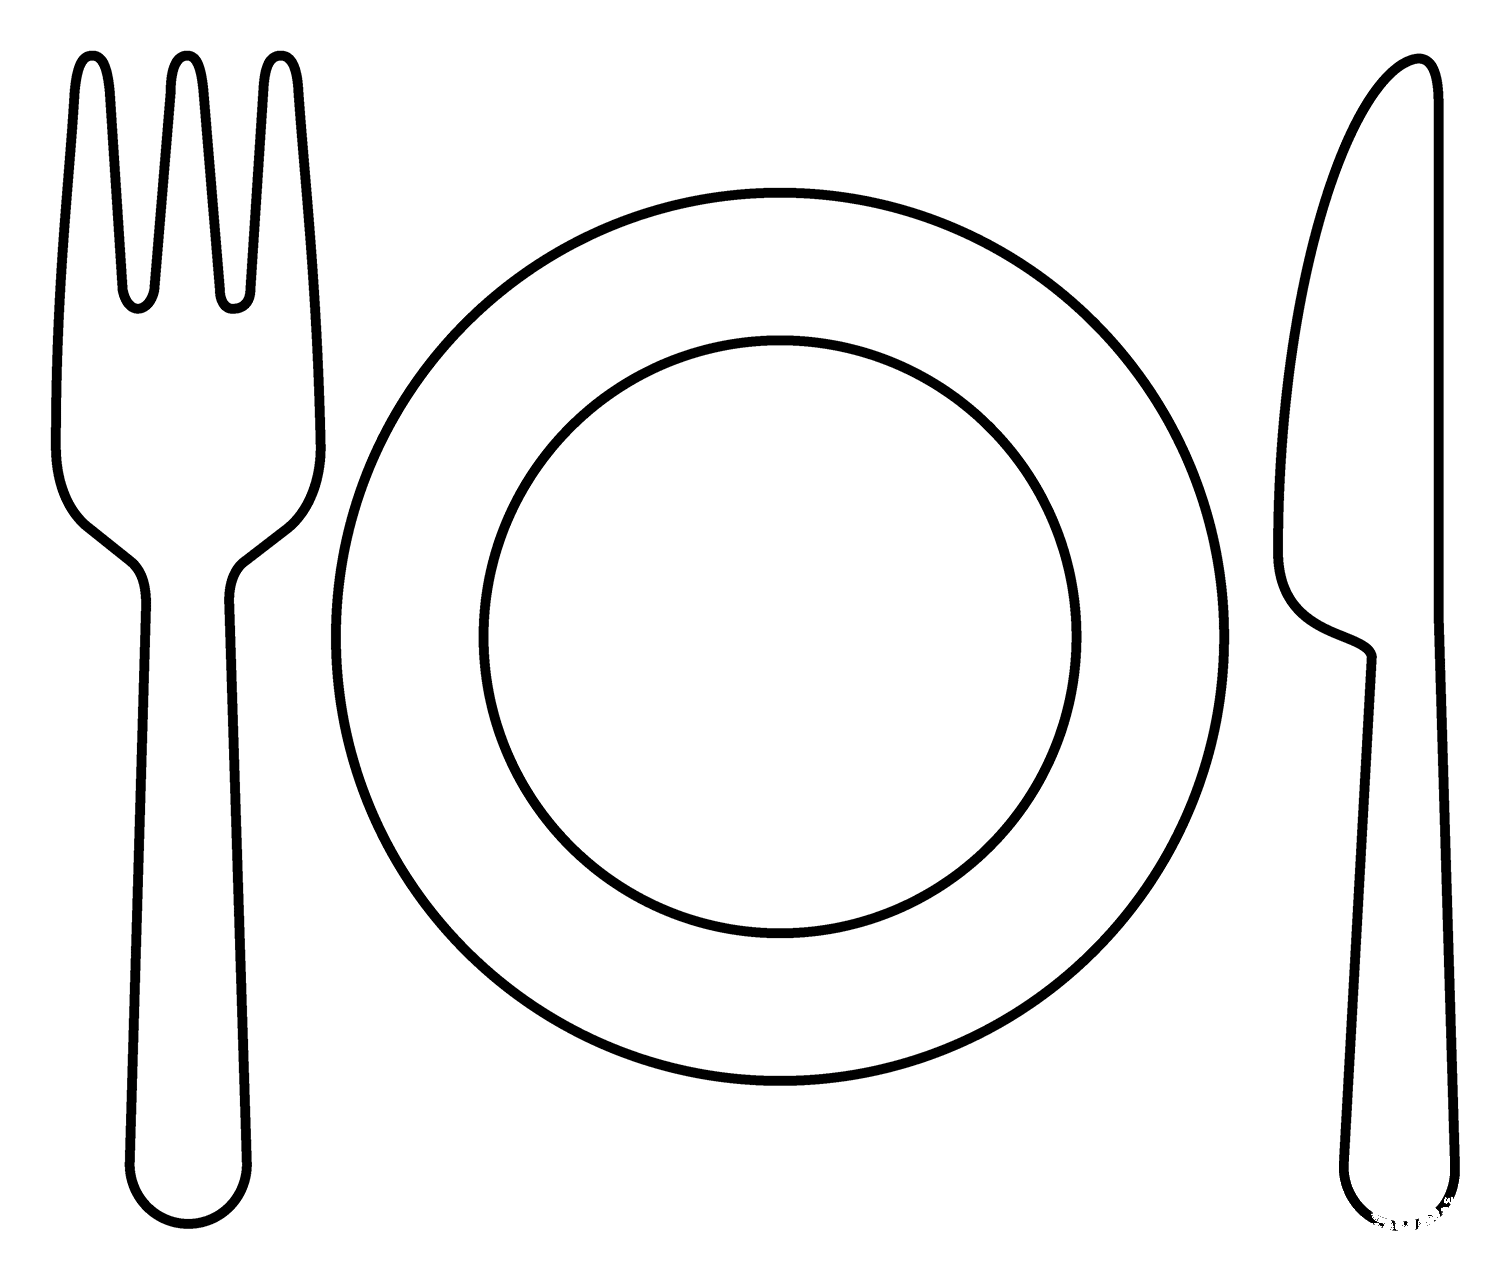 Fork and Knife with Plate Emoji coloring page - ColouringPages